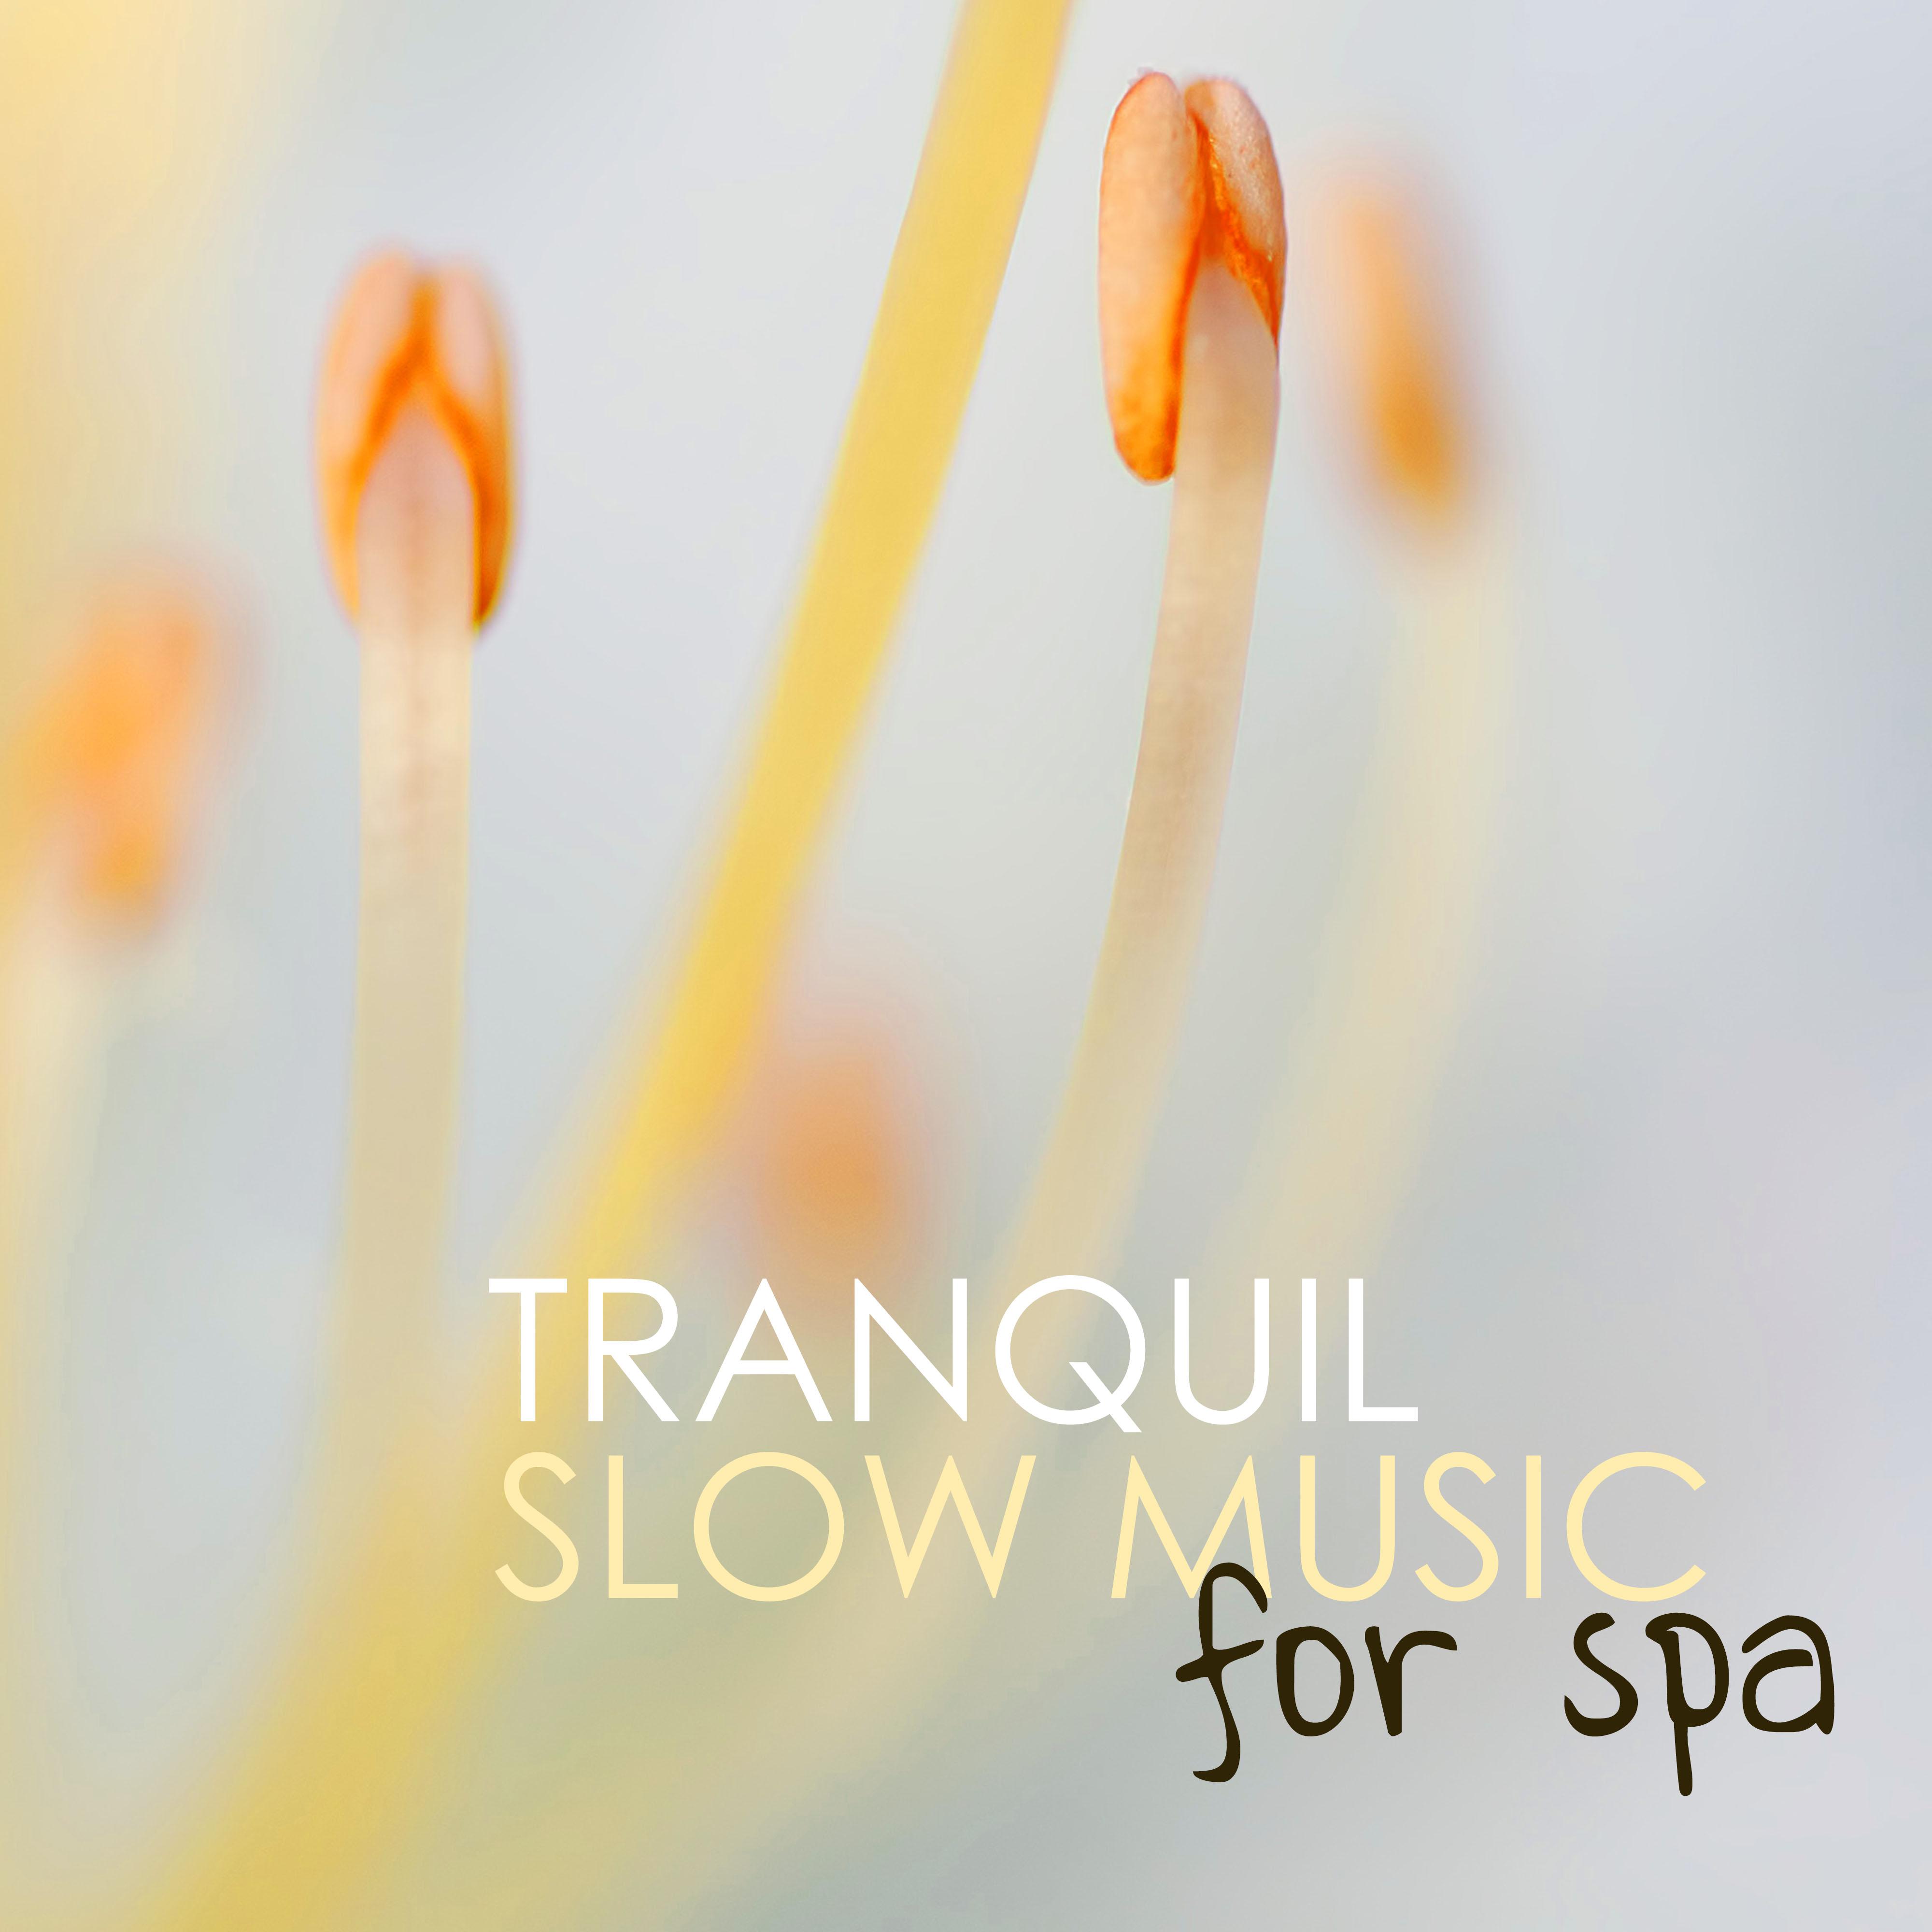 Tranquil Slow Music for Spa - Tranquility Wellness Songs for Serenity and Hotel Sauna Relaxation